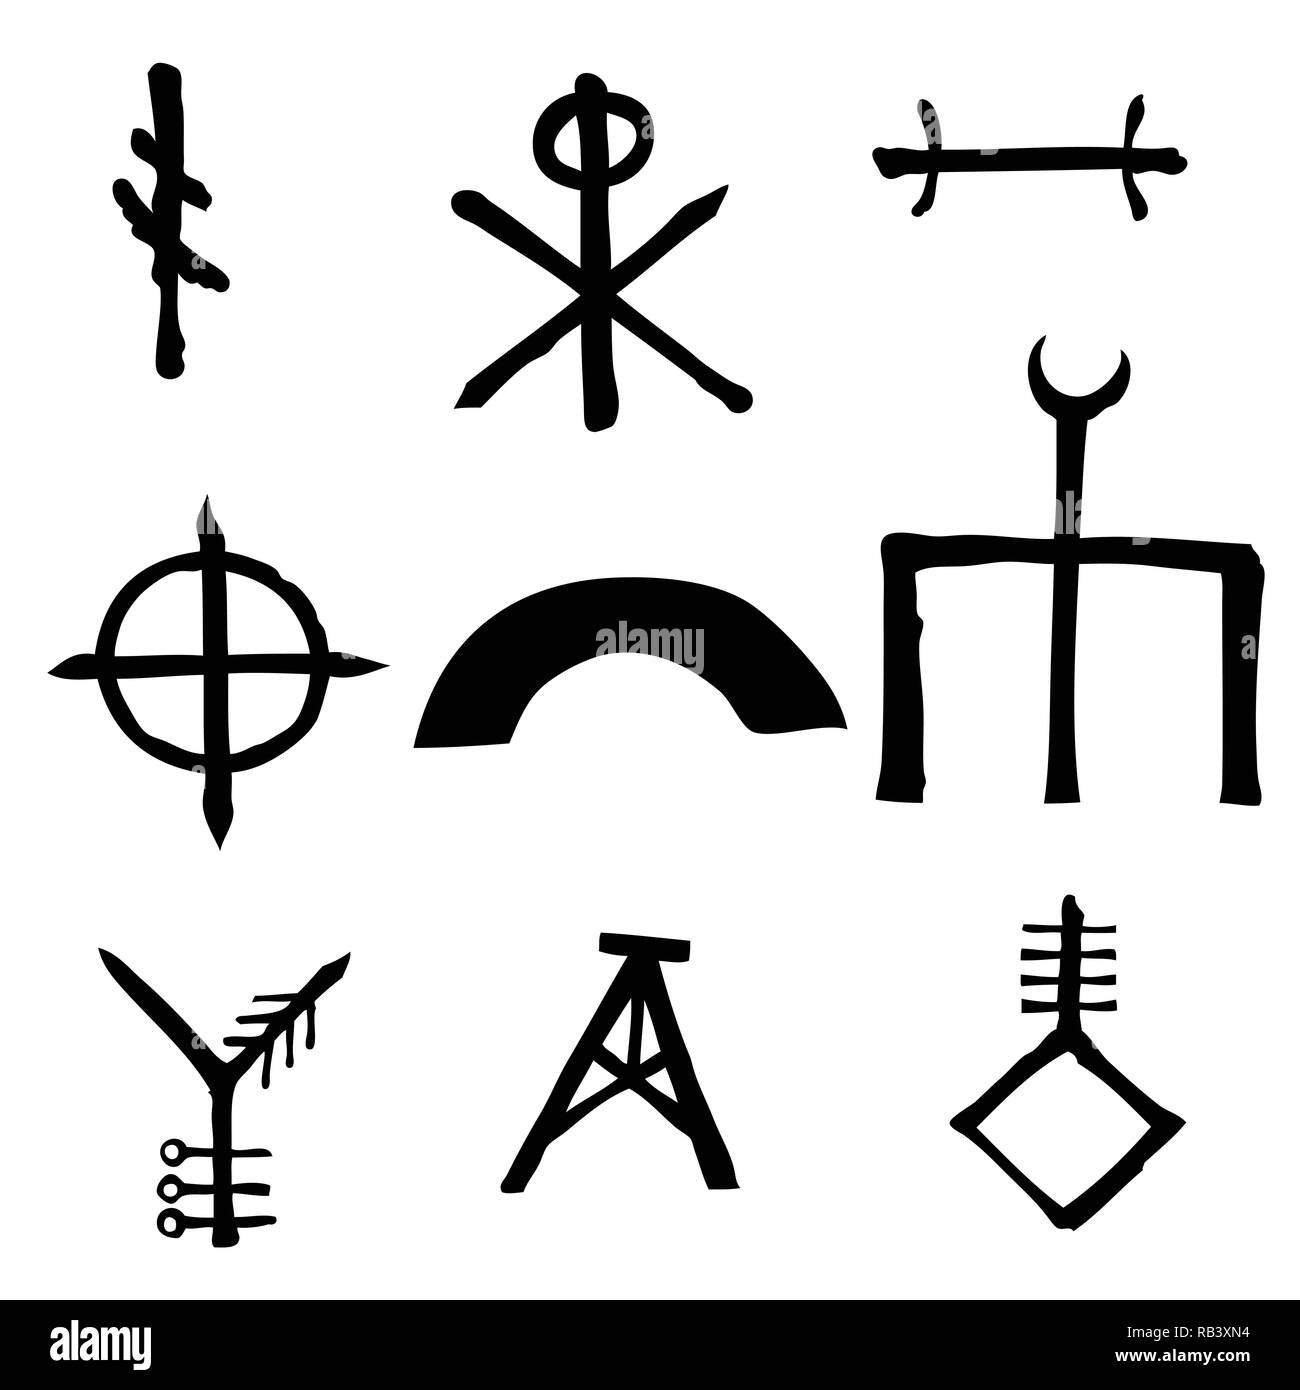 Wiccan symbols imaginary cross symbols, inspired by antichrist pentagram and witchcraft. Vector. Stock Vector